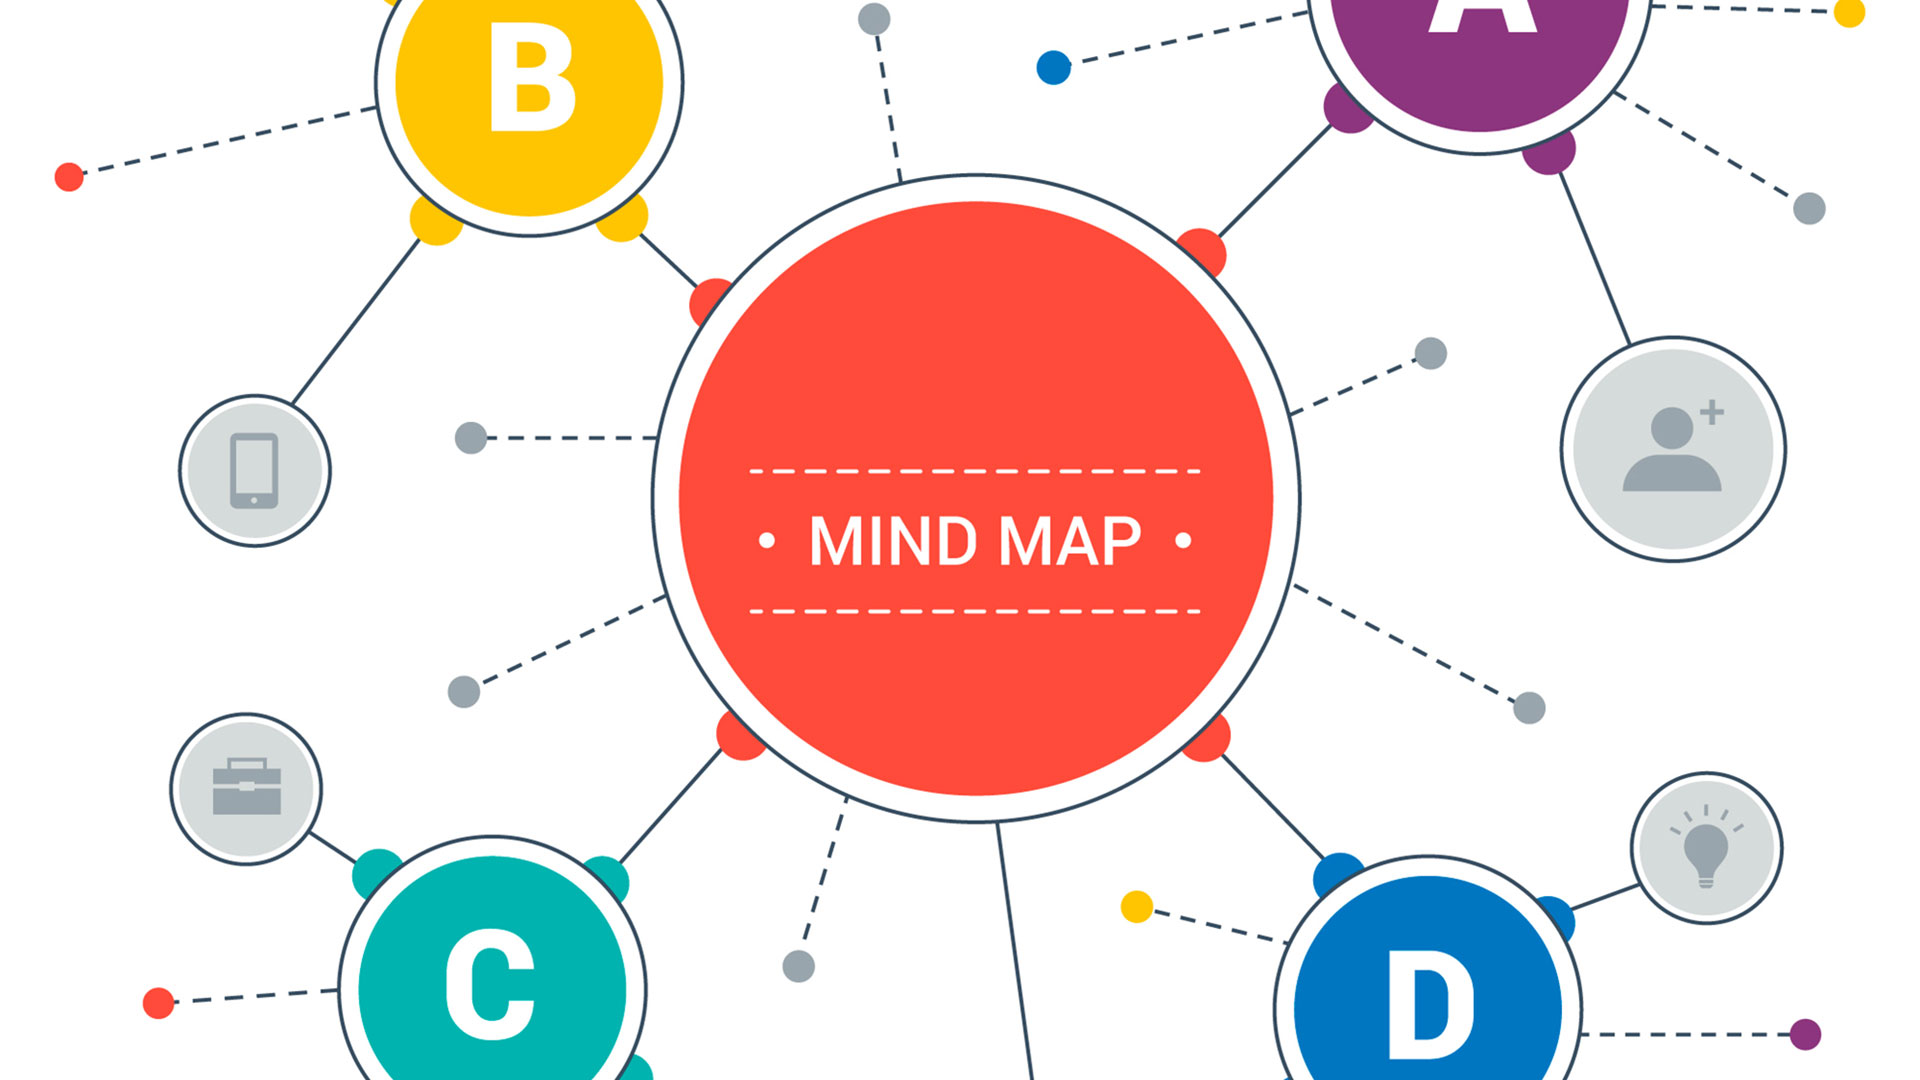 Mind-mapping makes writing easier